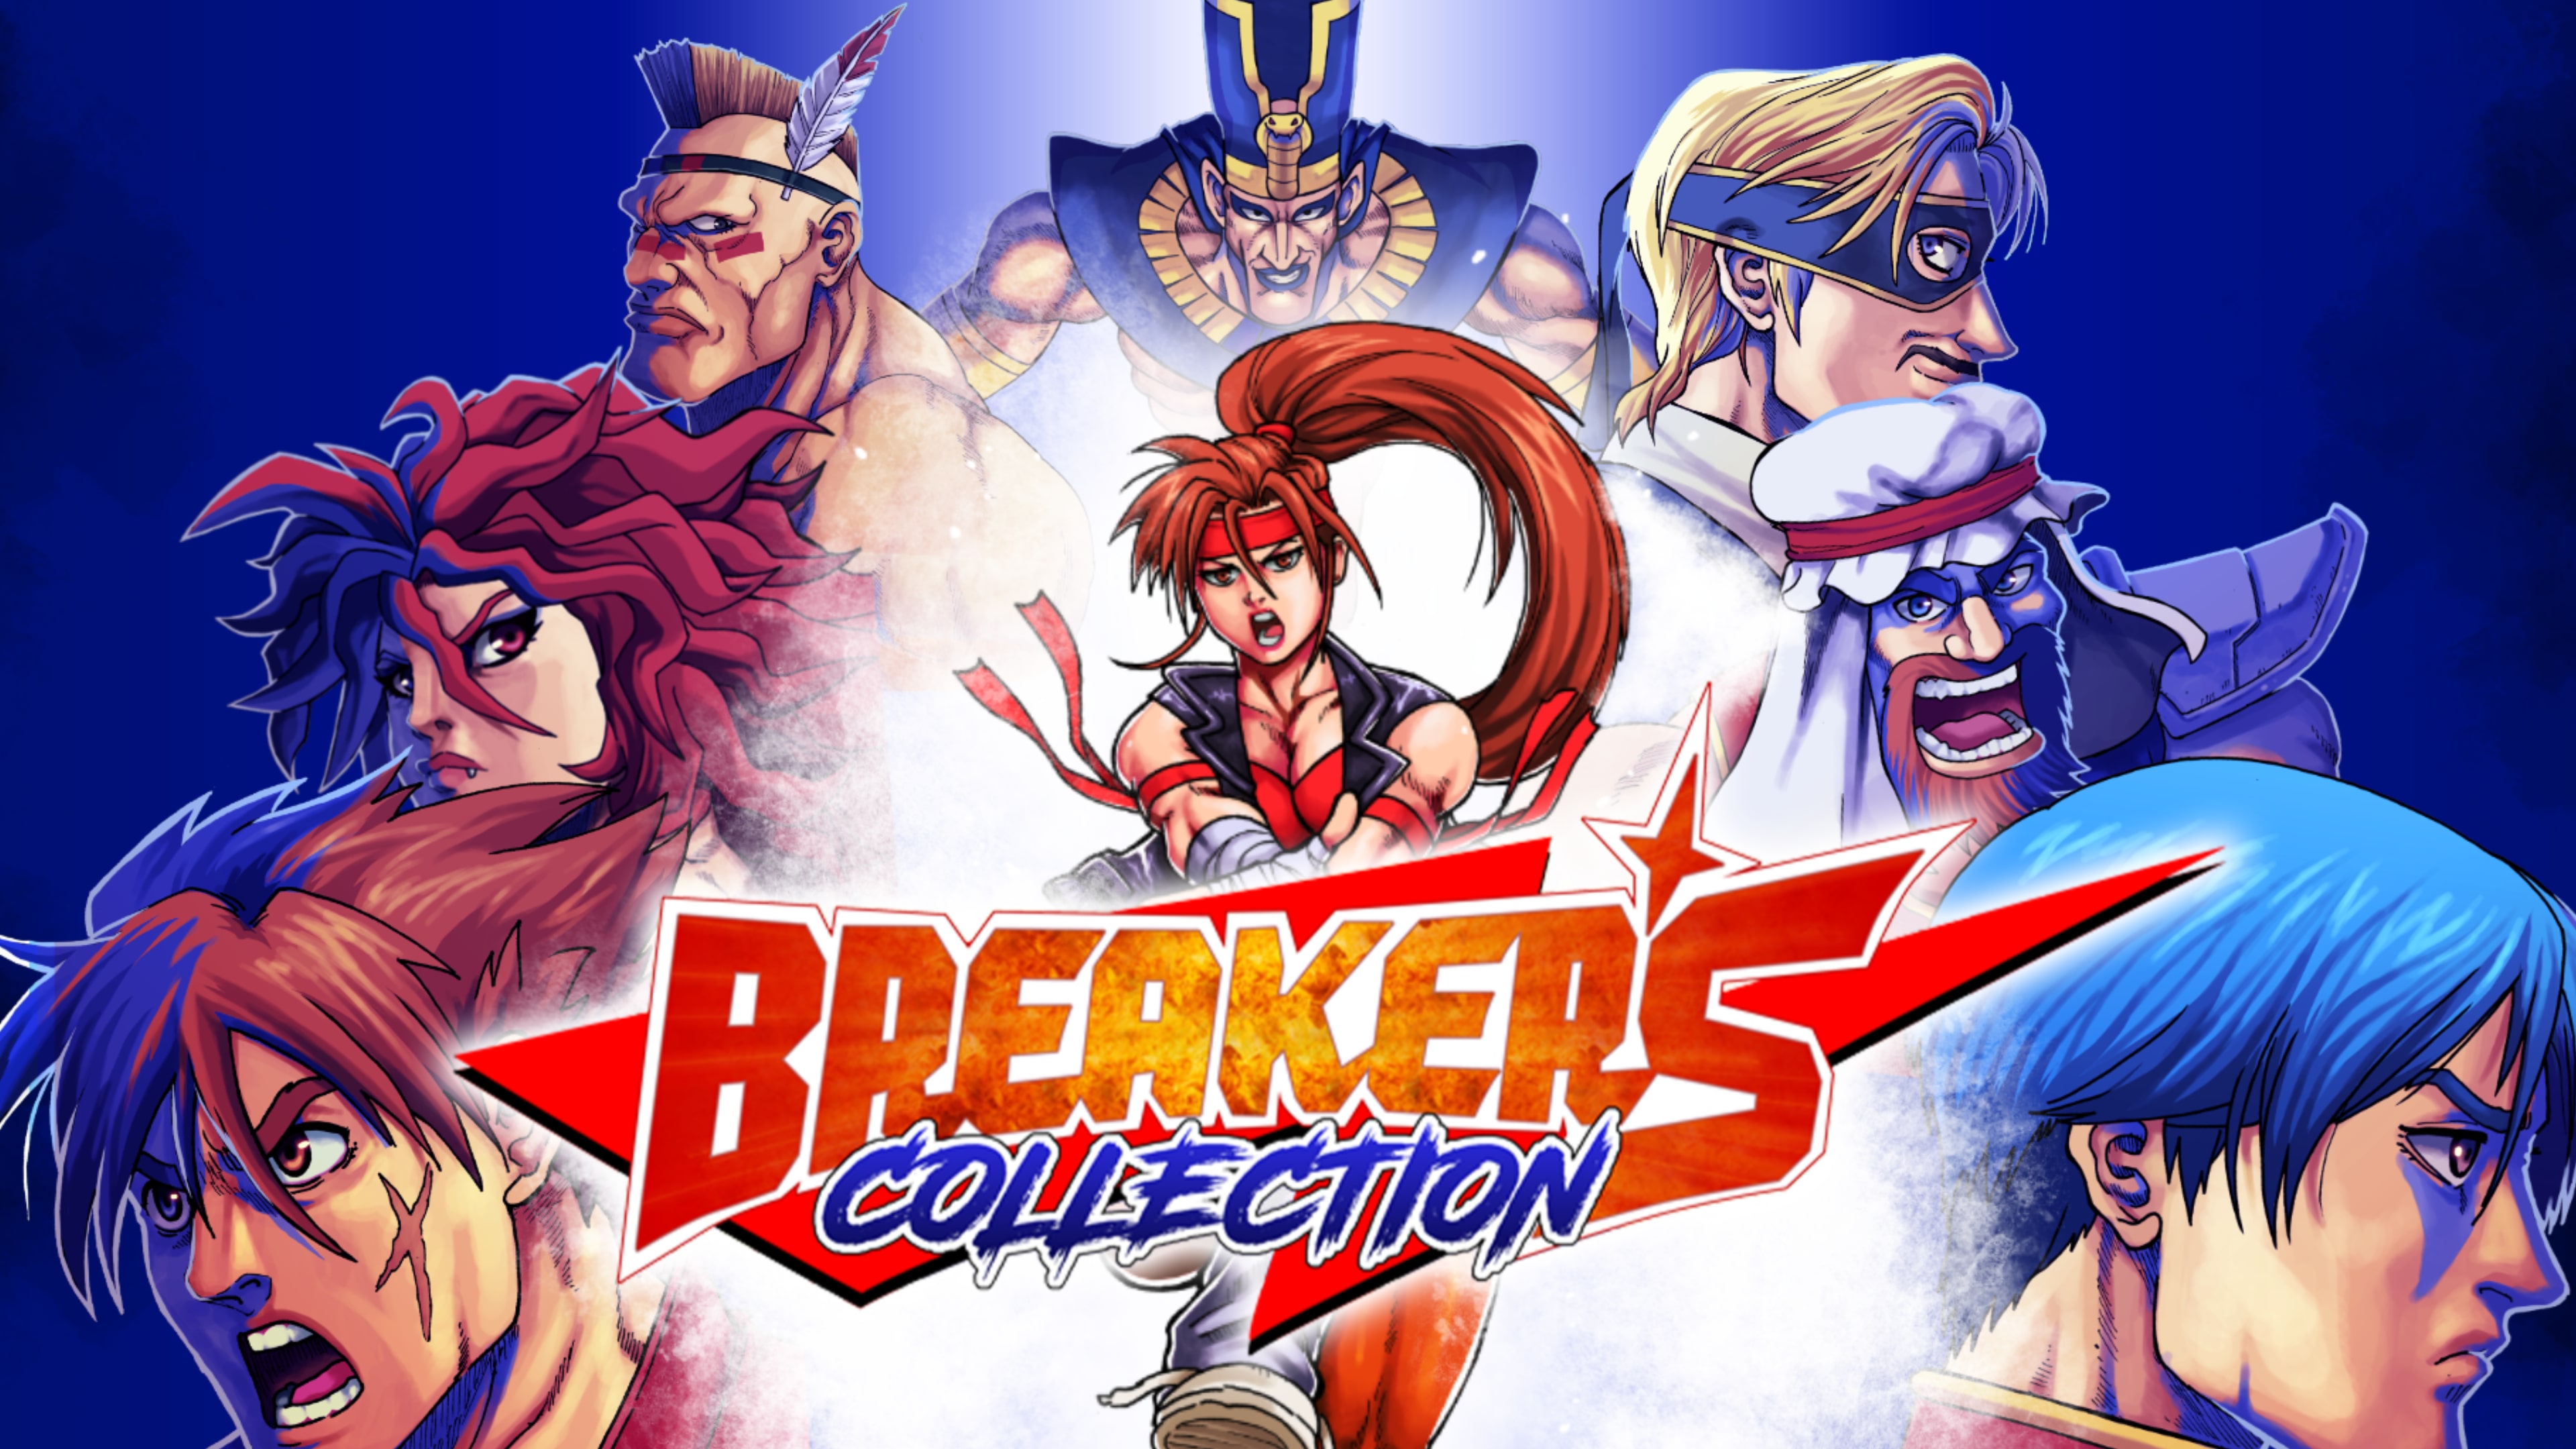 Breakers Collection (English)